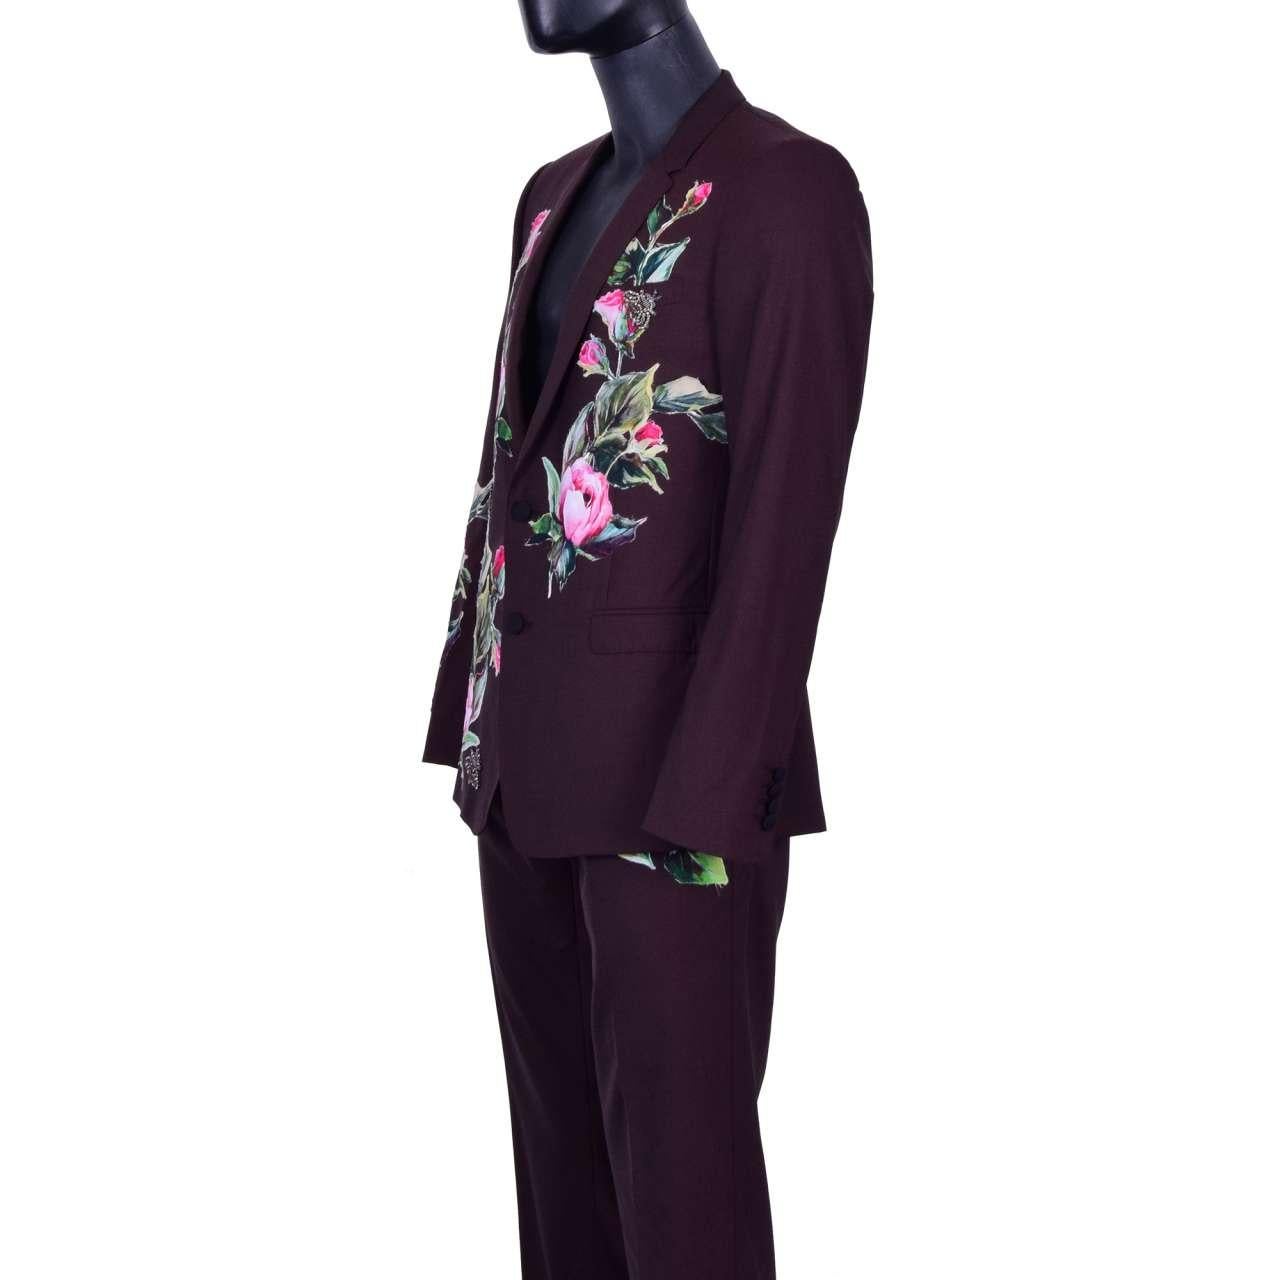 Dolce & Gabbana - GOLD Bees Embroidered Suit Brown 44 For Sale 3